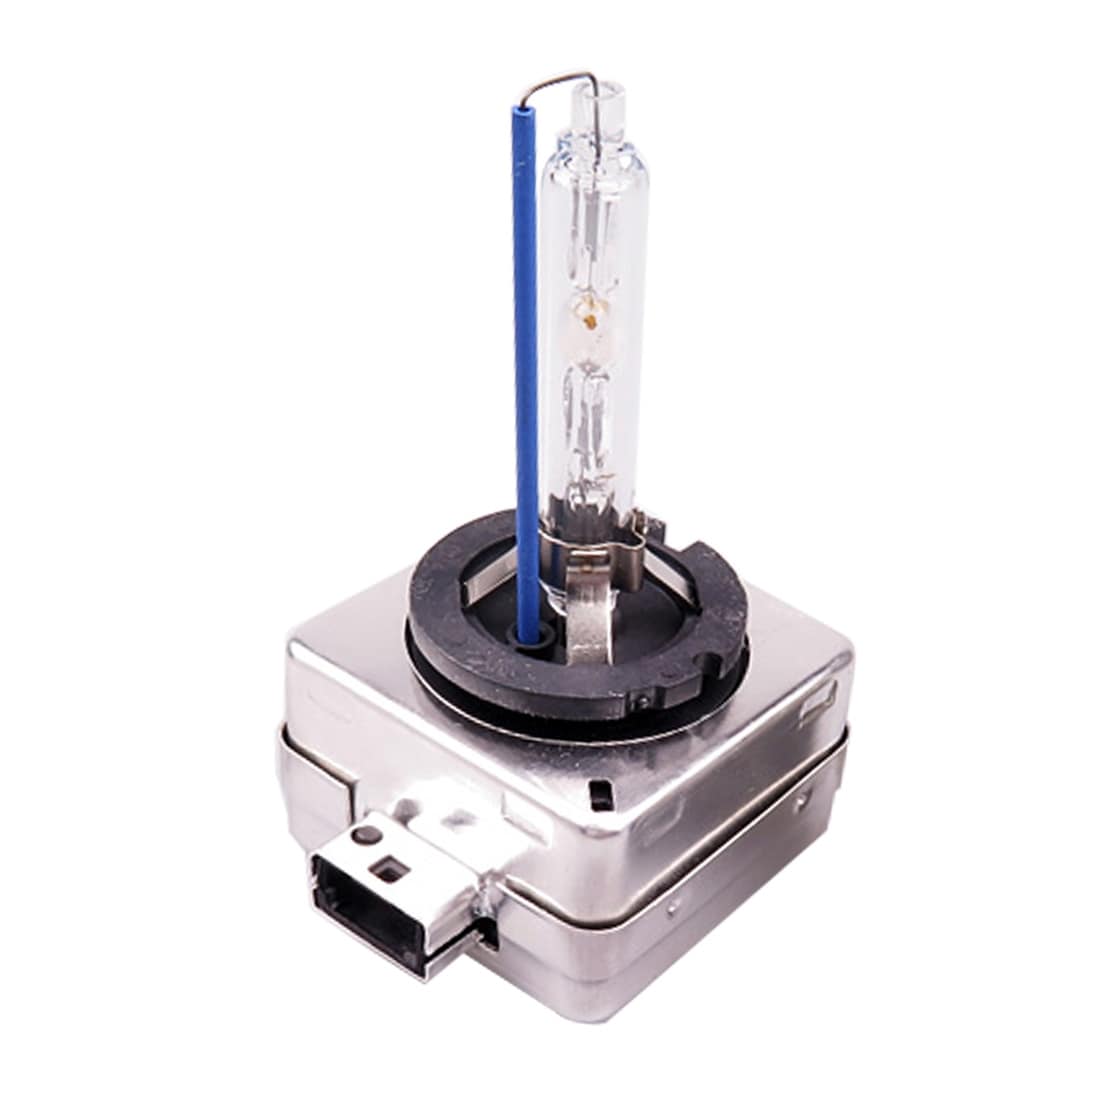 Xenon Lamp D3S 35W 3800 LM 6000K  - 2 Pack